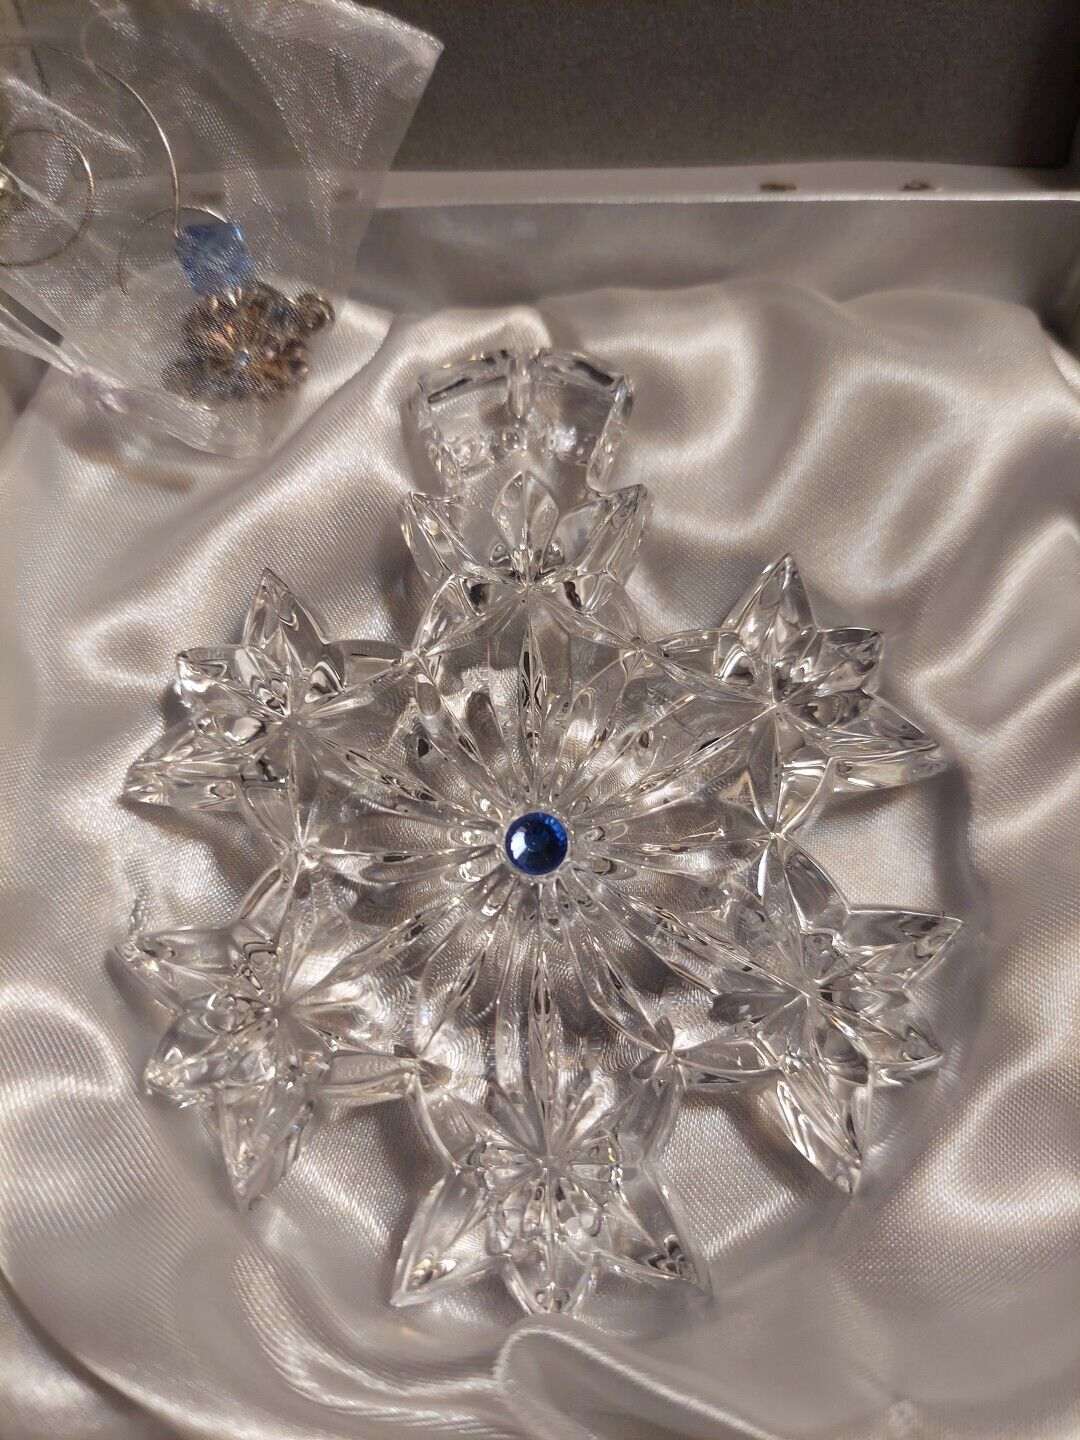  WATERFORD Crystal Snowflake Wishes Happiness Christmas Ornament w/ Enhancer